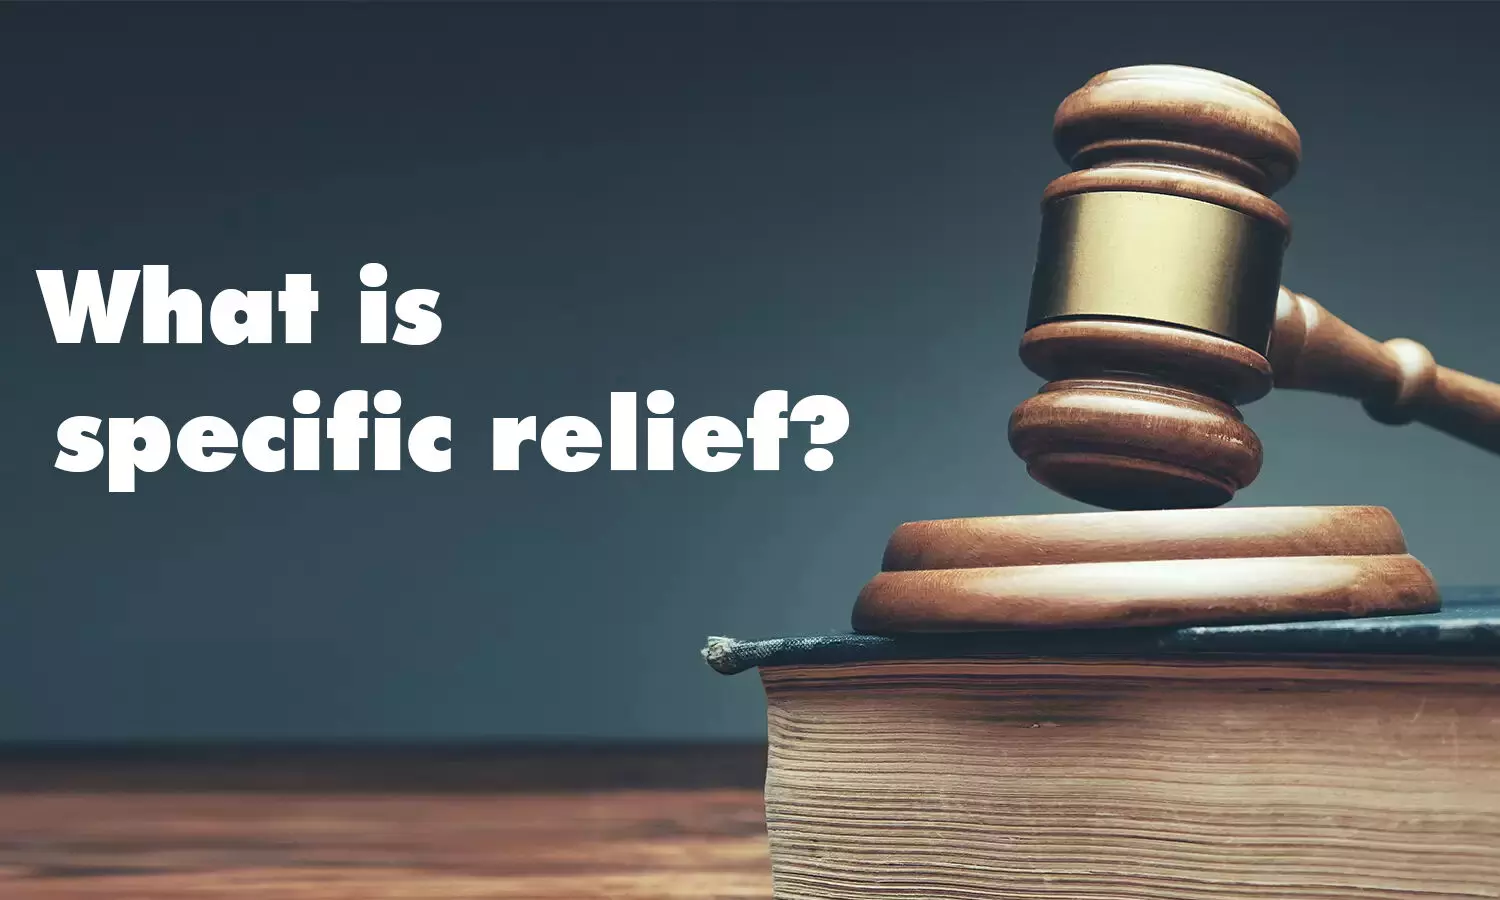 What is specific relief?